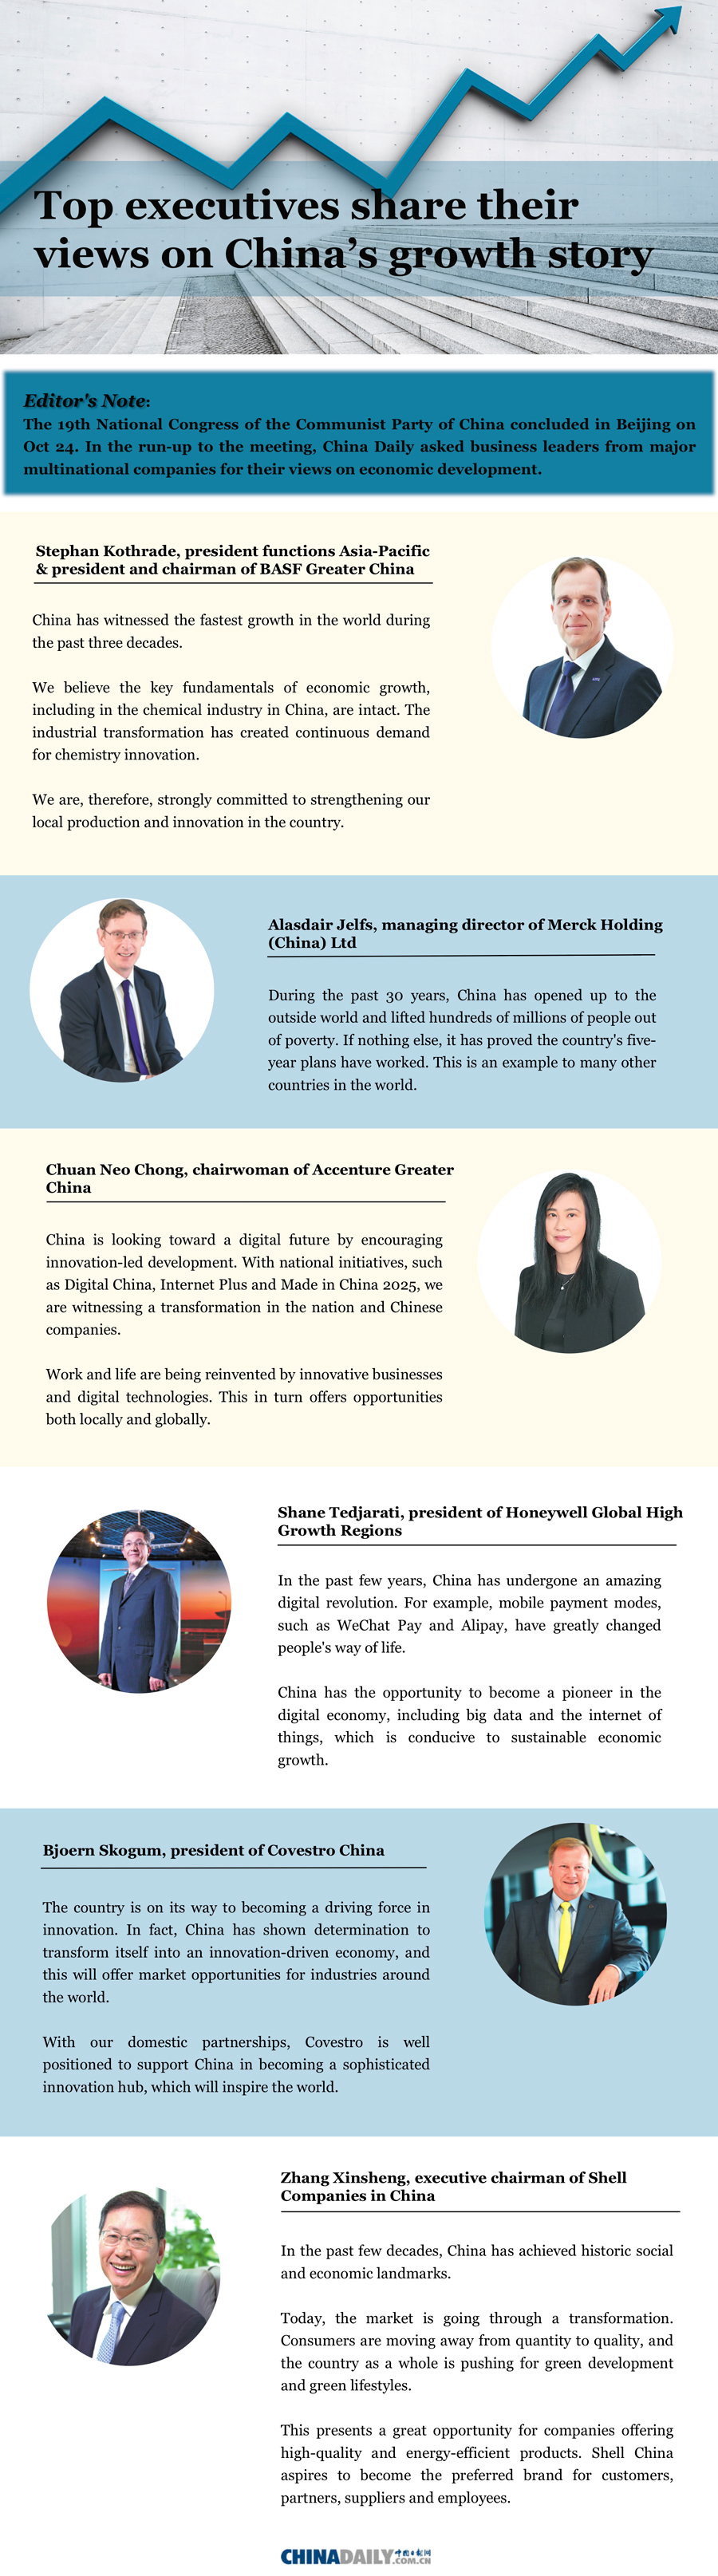 Top executives share their views on China's growth story